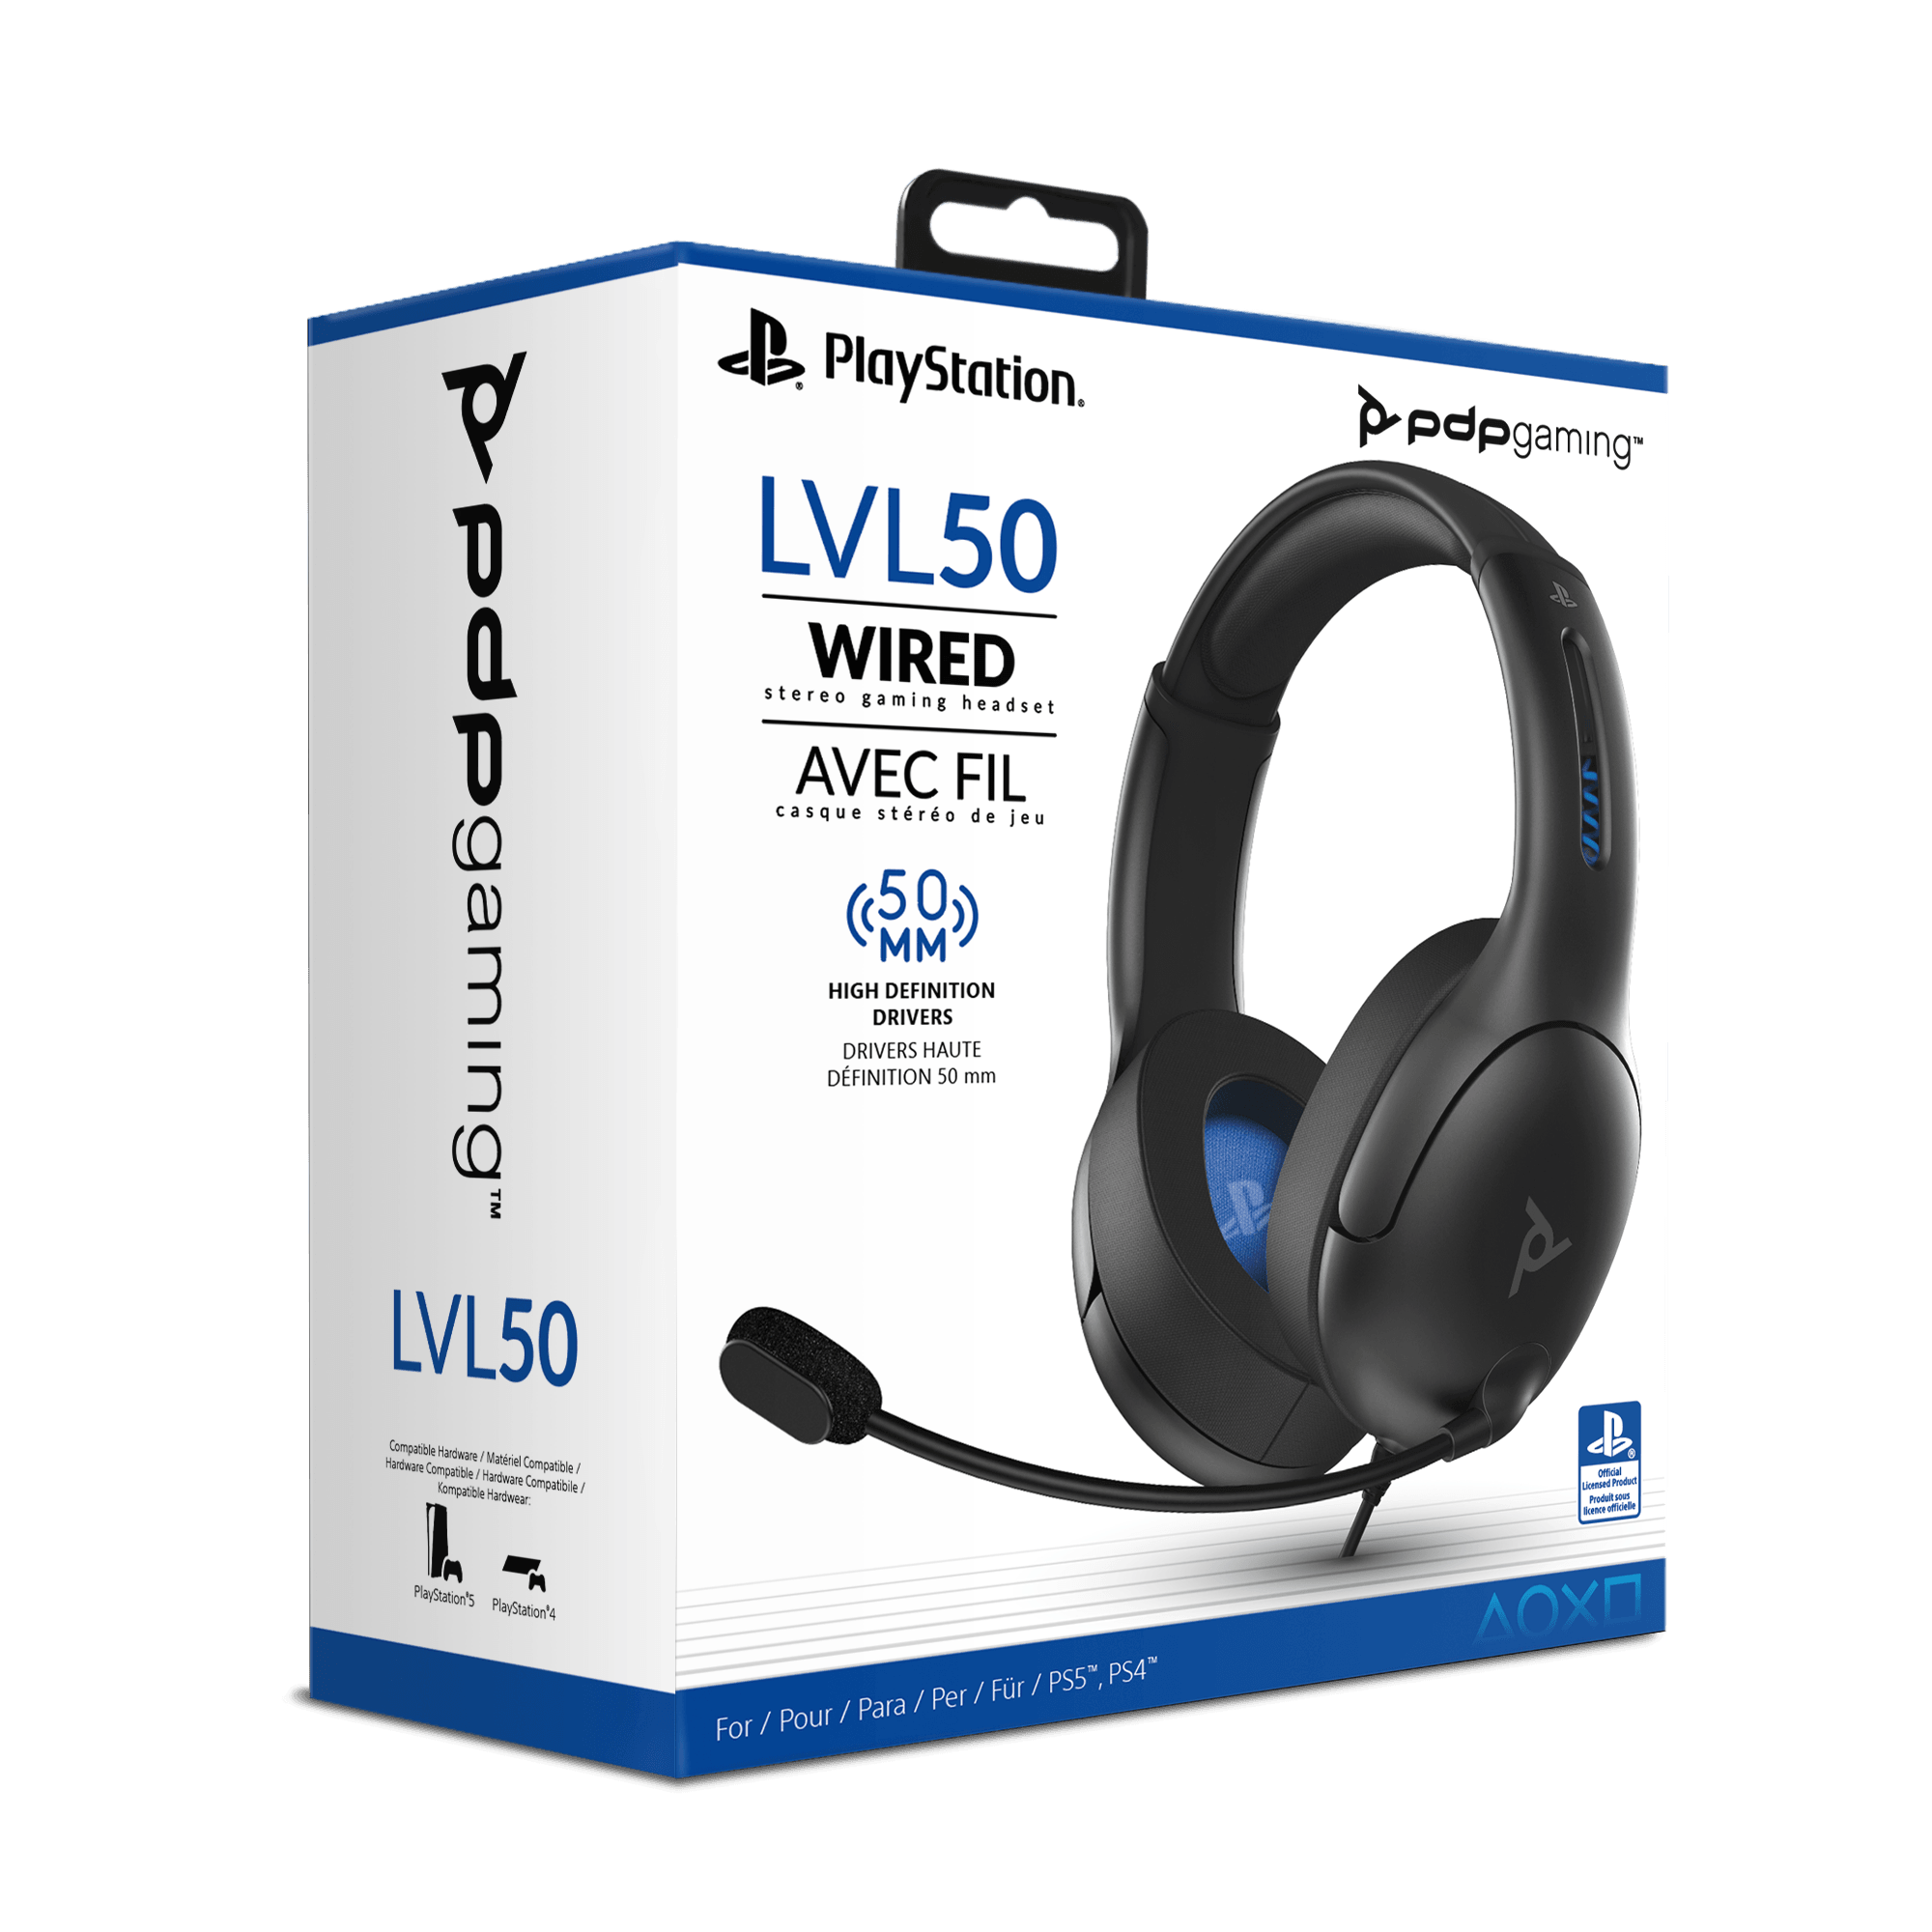 Ps4 Lvl50 Headset - Want a New Gadget